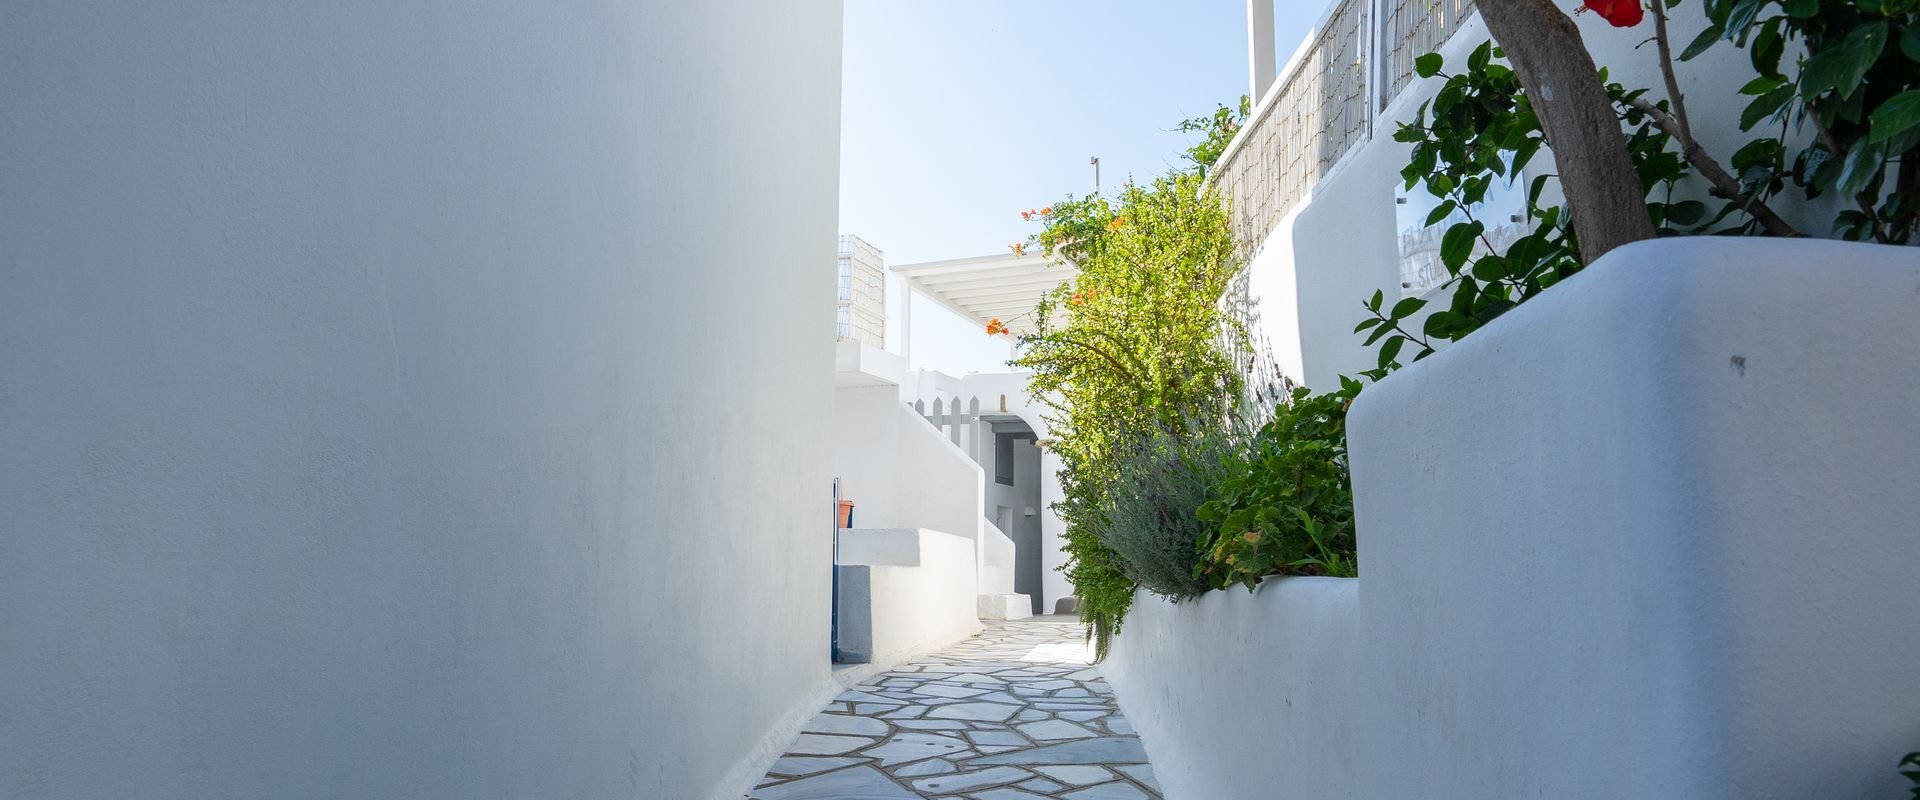 Typical cyclades architecture & aesthetics in Hora of Tinos